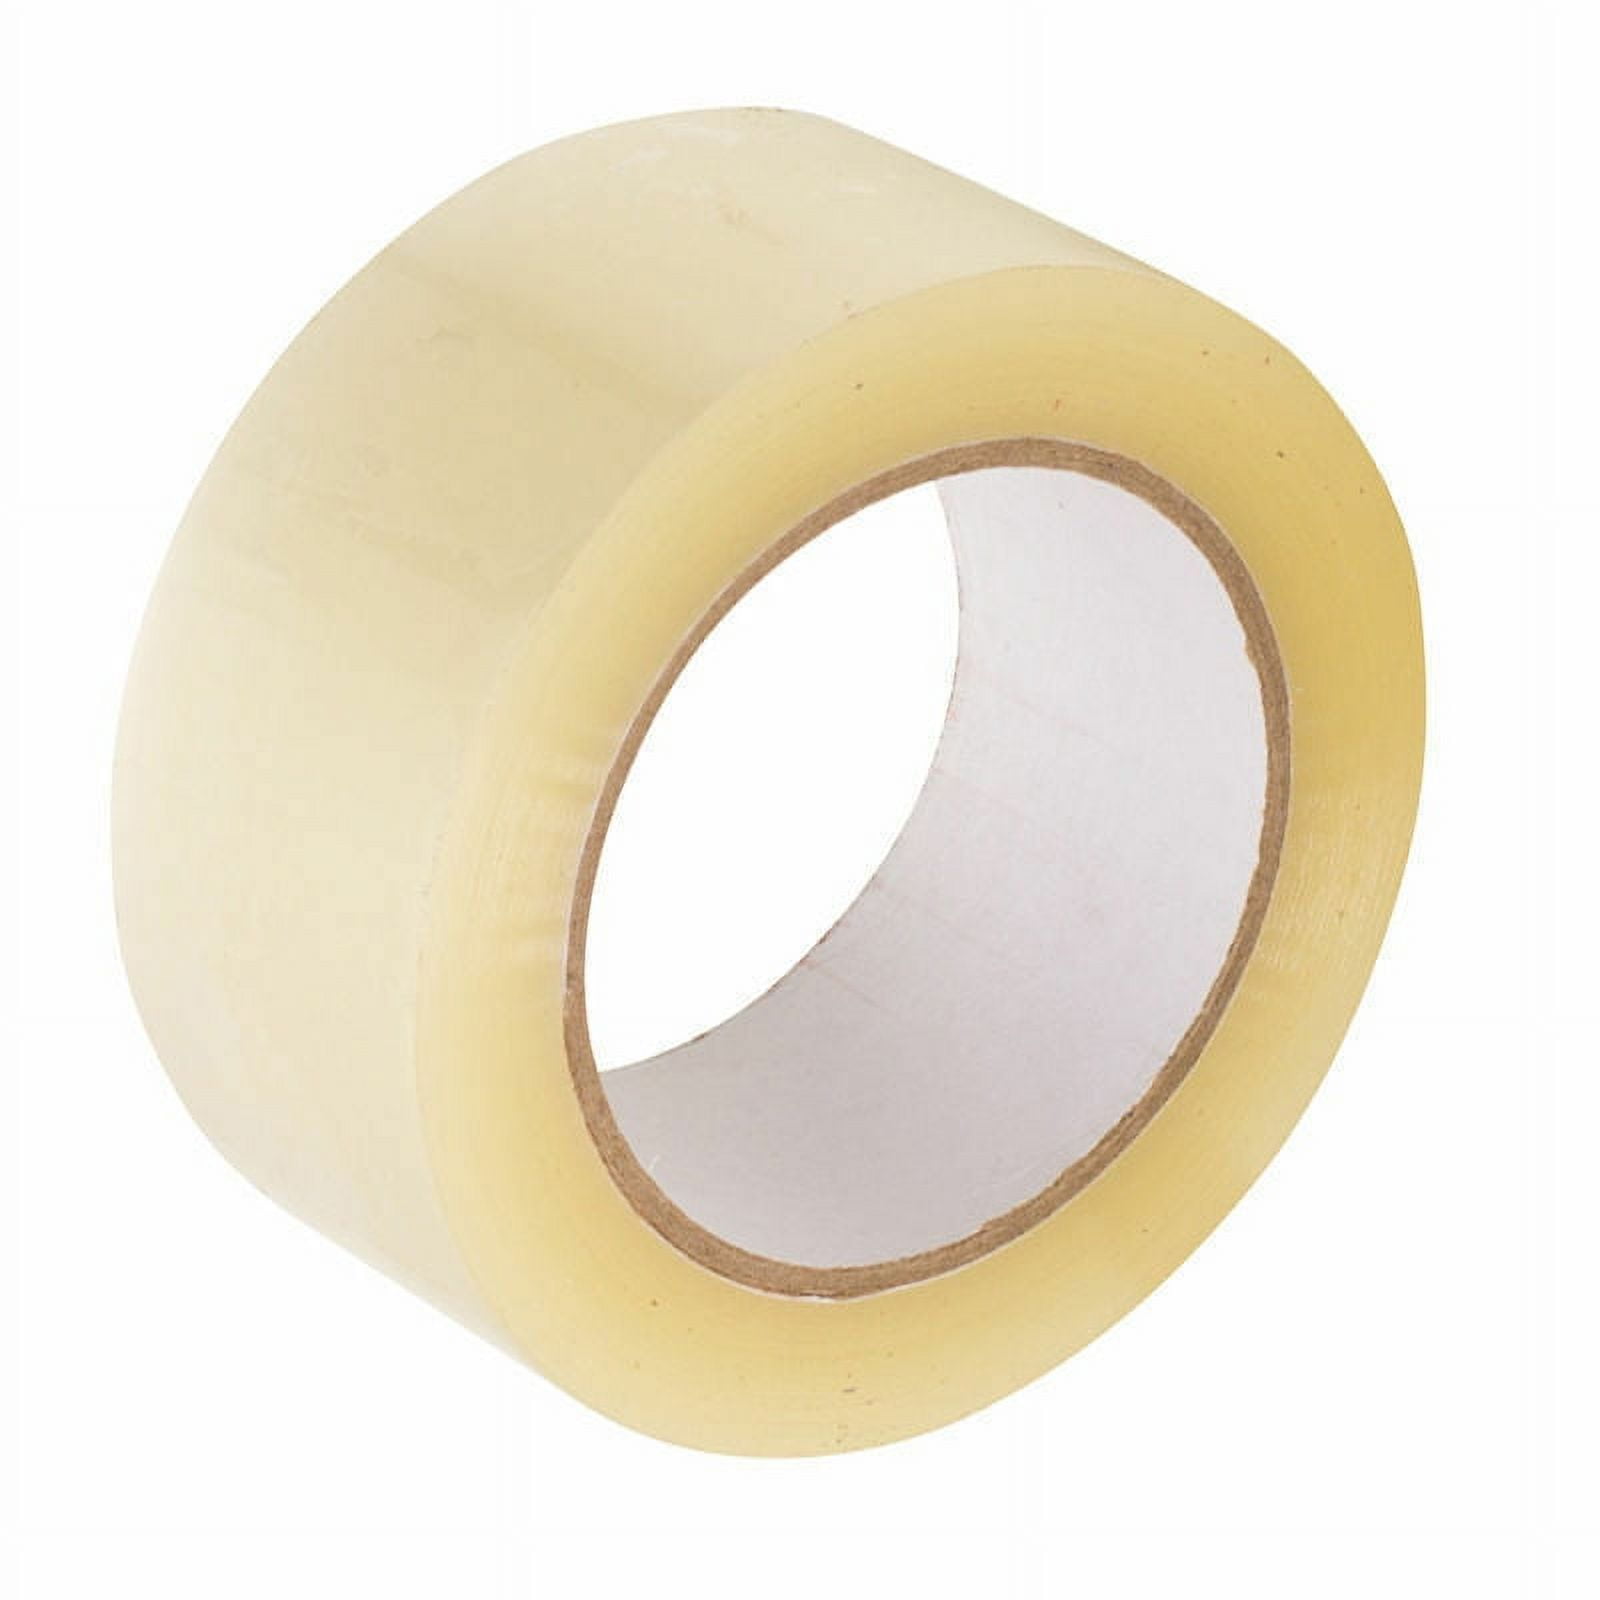 Supreme® 1180 Clear Tape 2 x 110 Yds. 36 Rolls 2 Mil